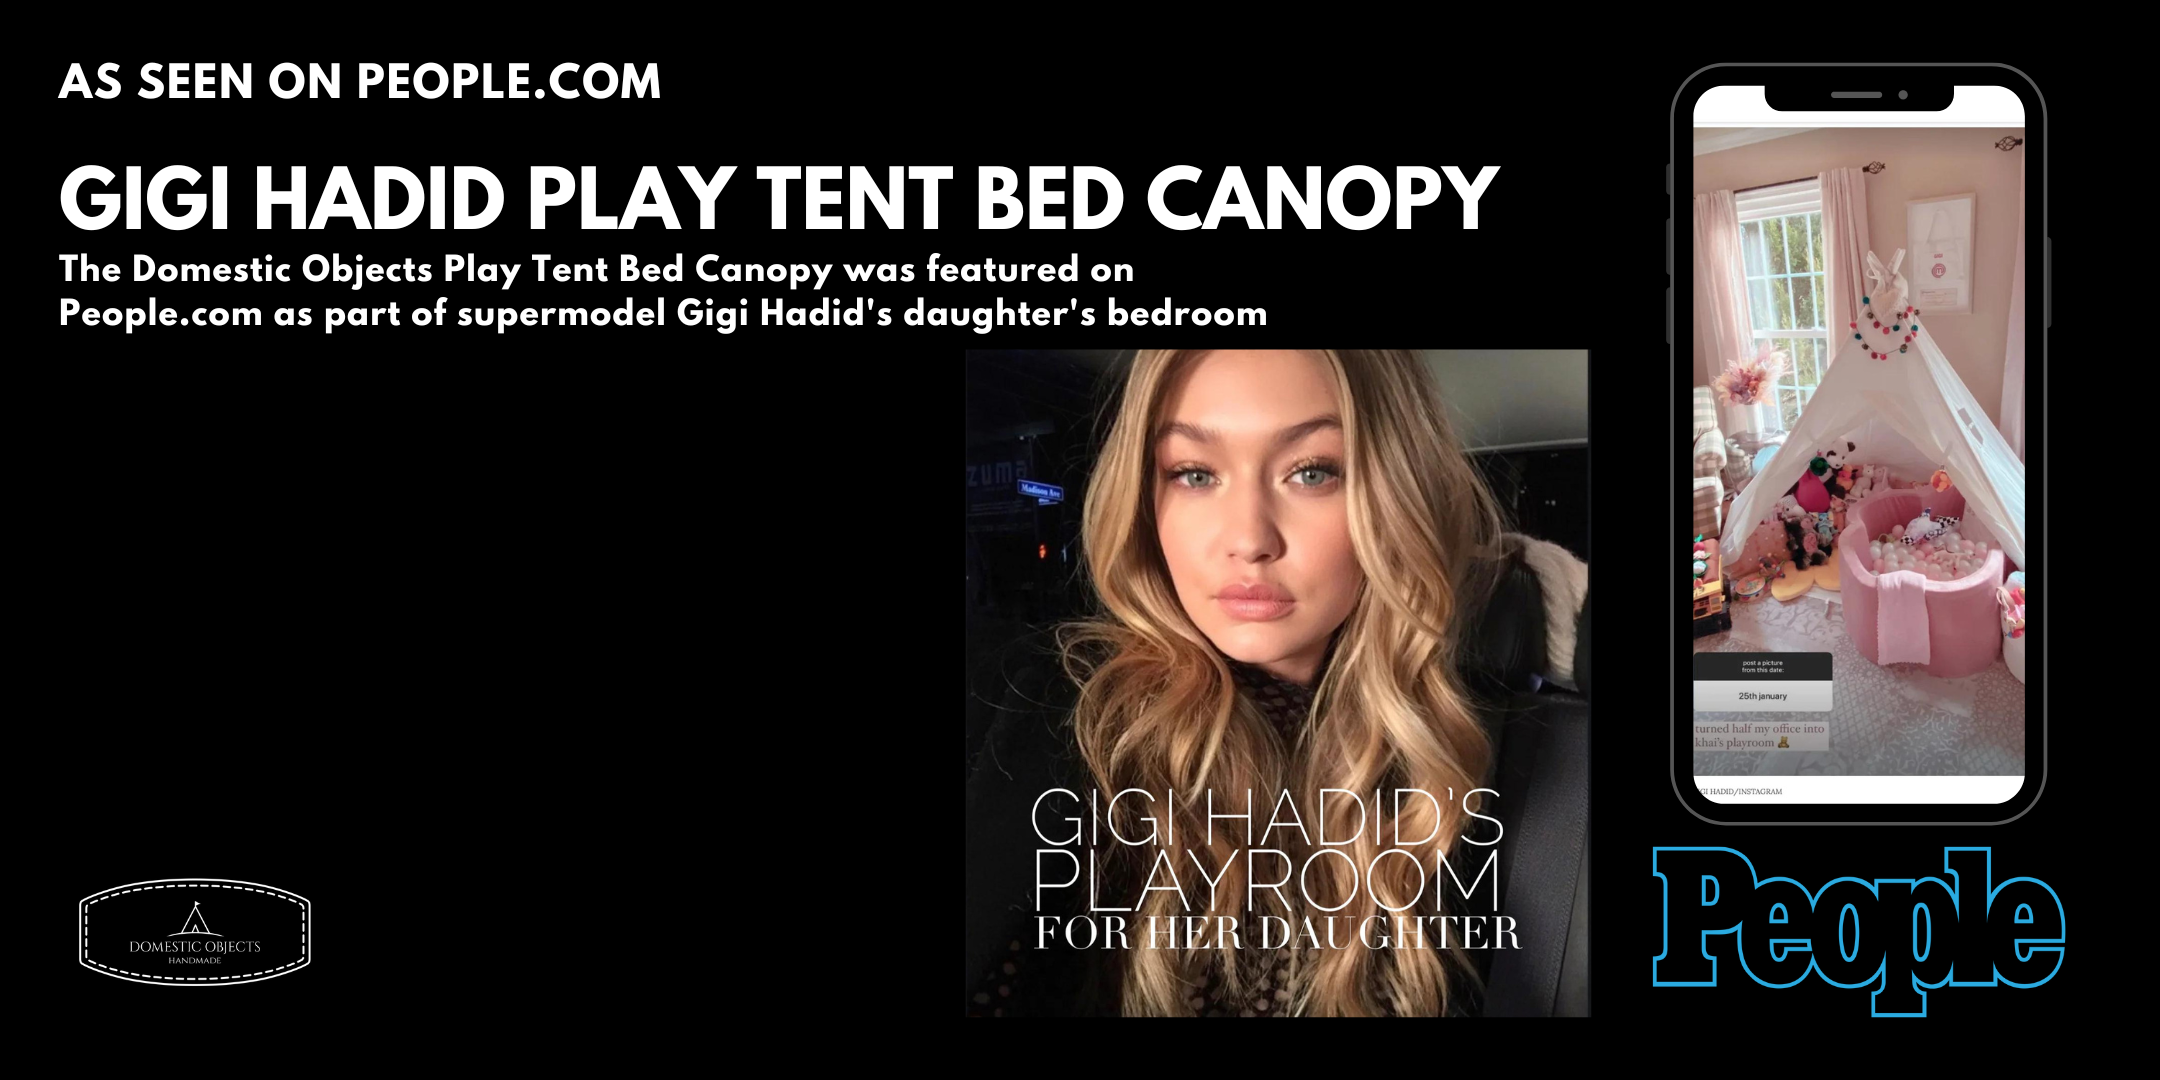 Gigi Hadid Play Tent Bed Canopy People.com Domestic Objects